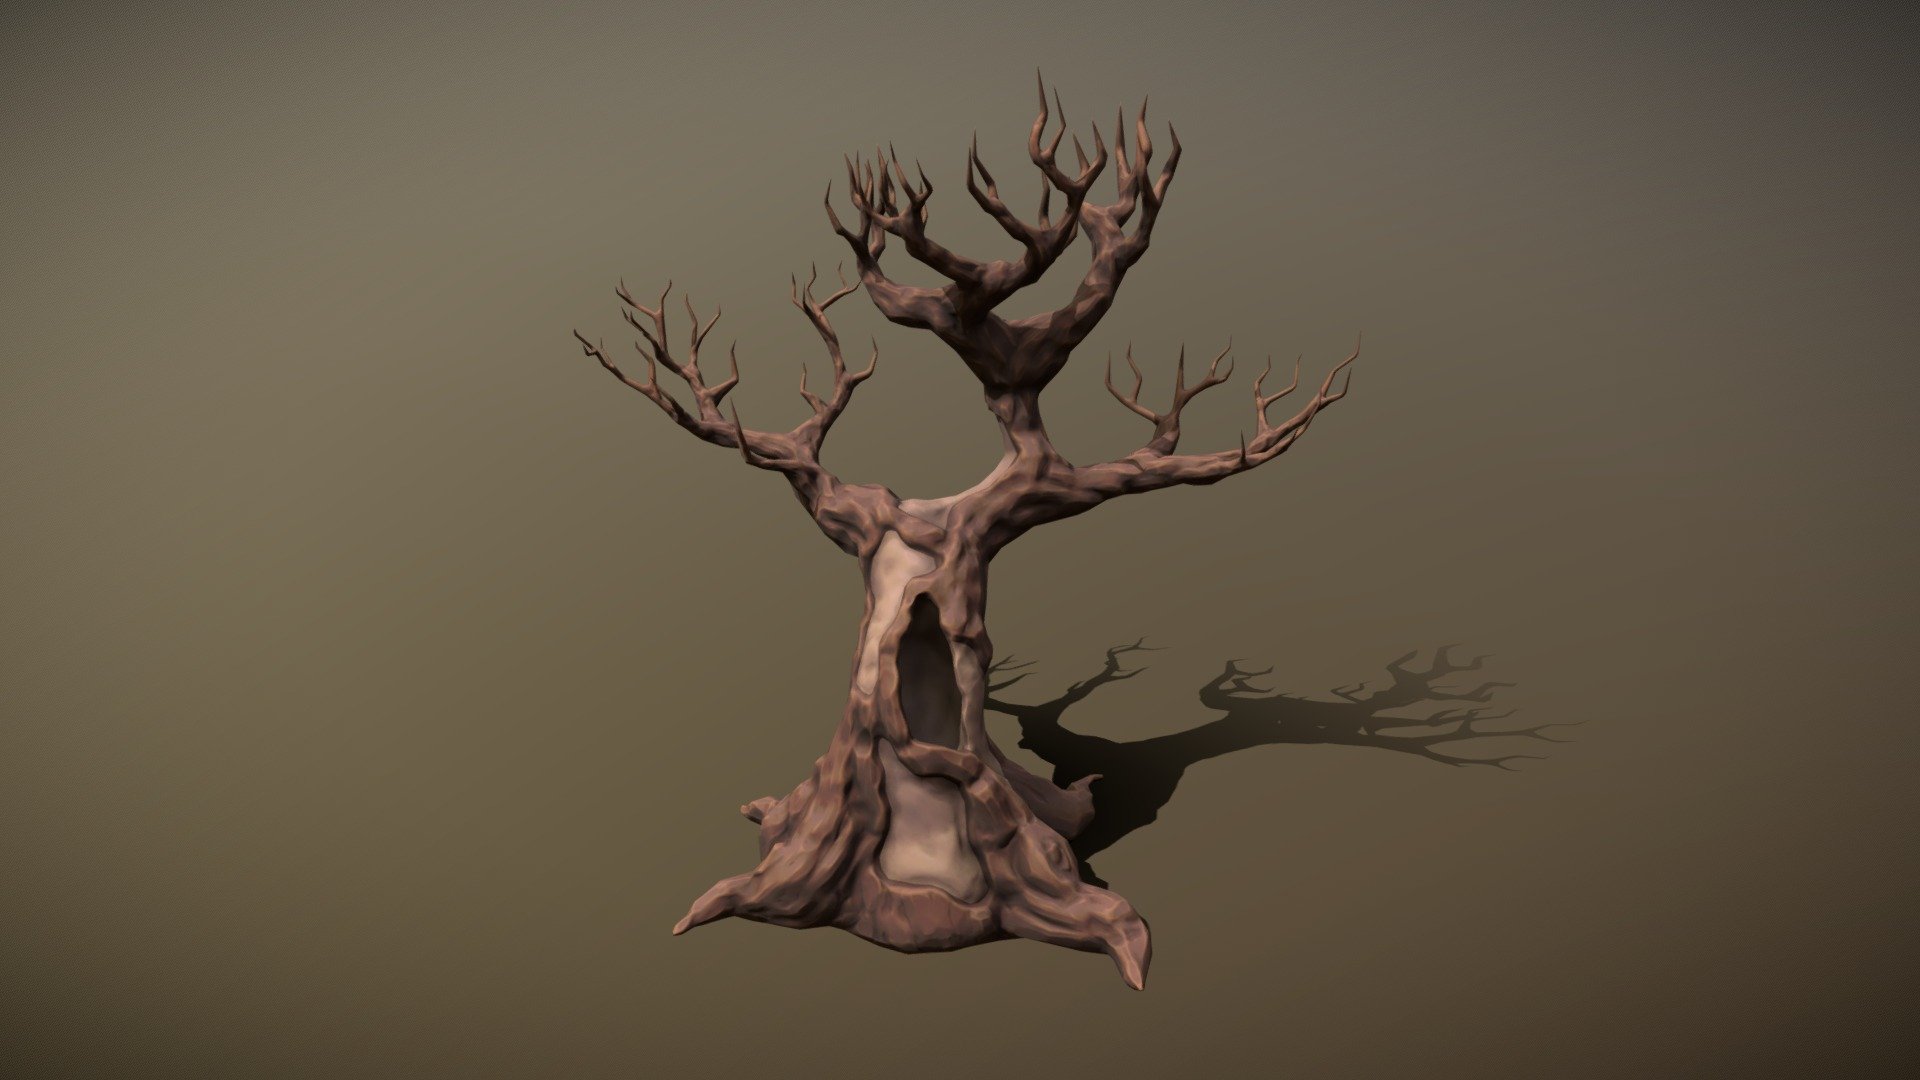 A simple stylized dead tree with multiple color variants

Can be bought on the Unreal marketplace and Unity assetstore
Links:

Dimensions:
X  5.11m  Y  7.24m  Z  7.2m

Statistics:
4,646 vertices
9,288 triangles

gameready
UV unwrapped &amp; textured
2048x2048 px textures - Stylized Dead Tree - 3D model by xKeaton 3d model